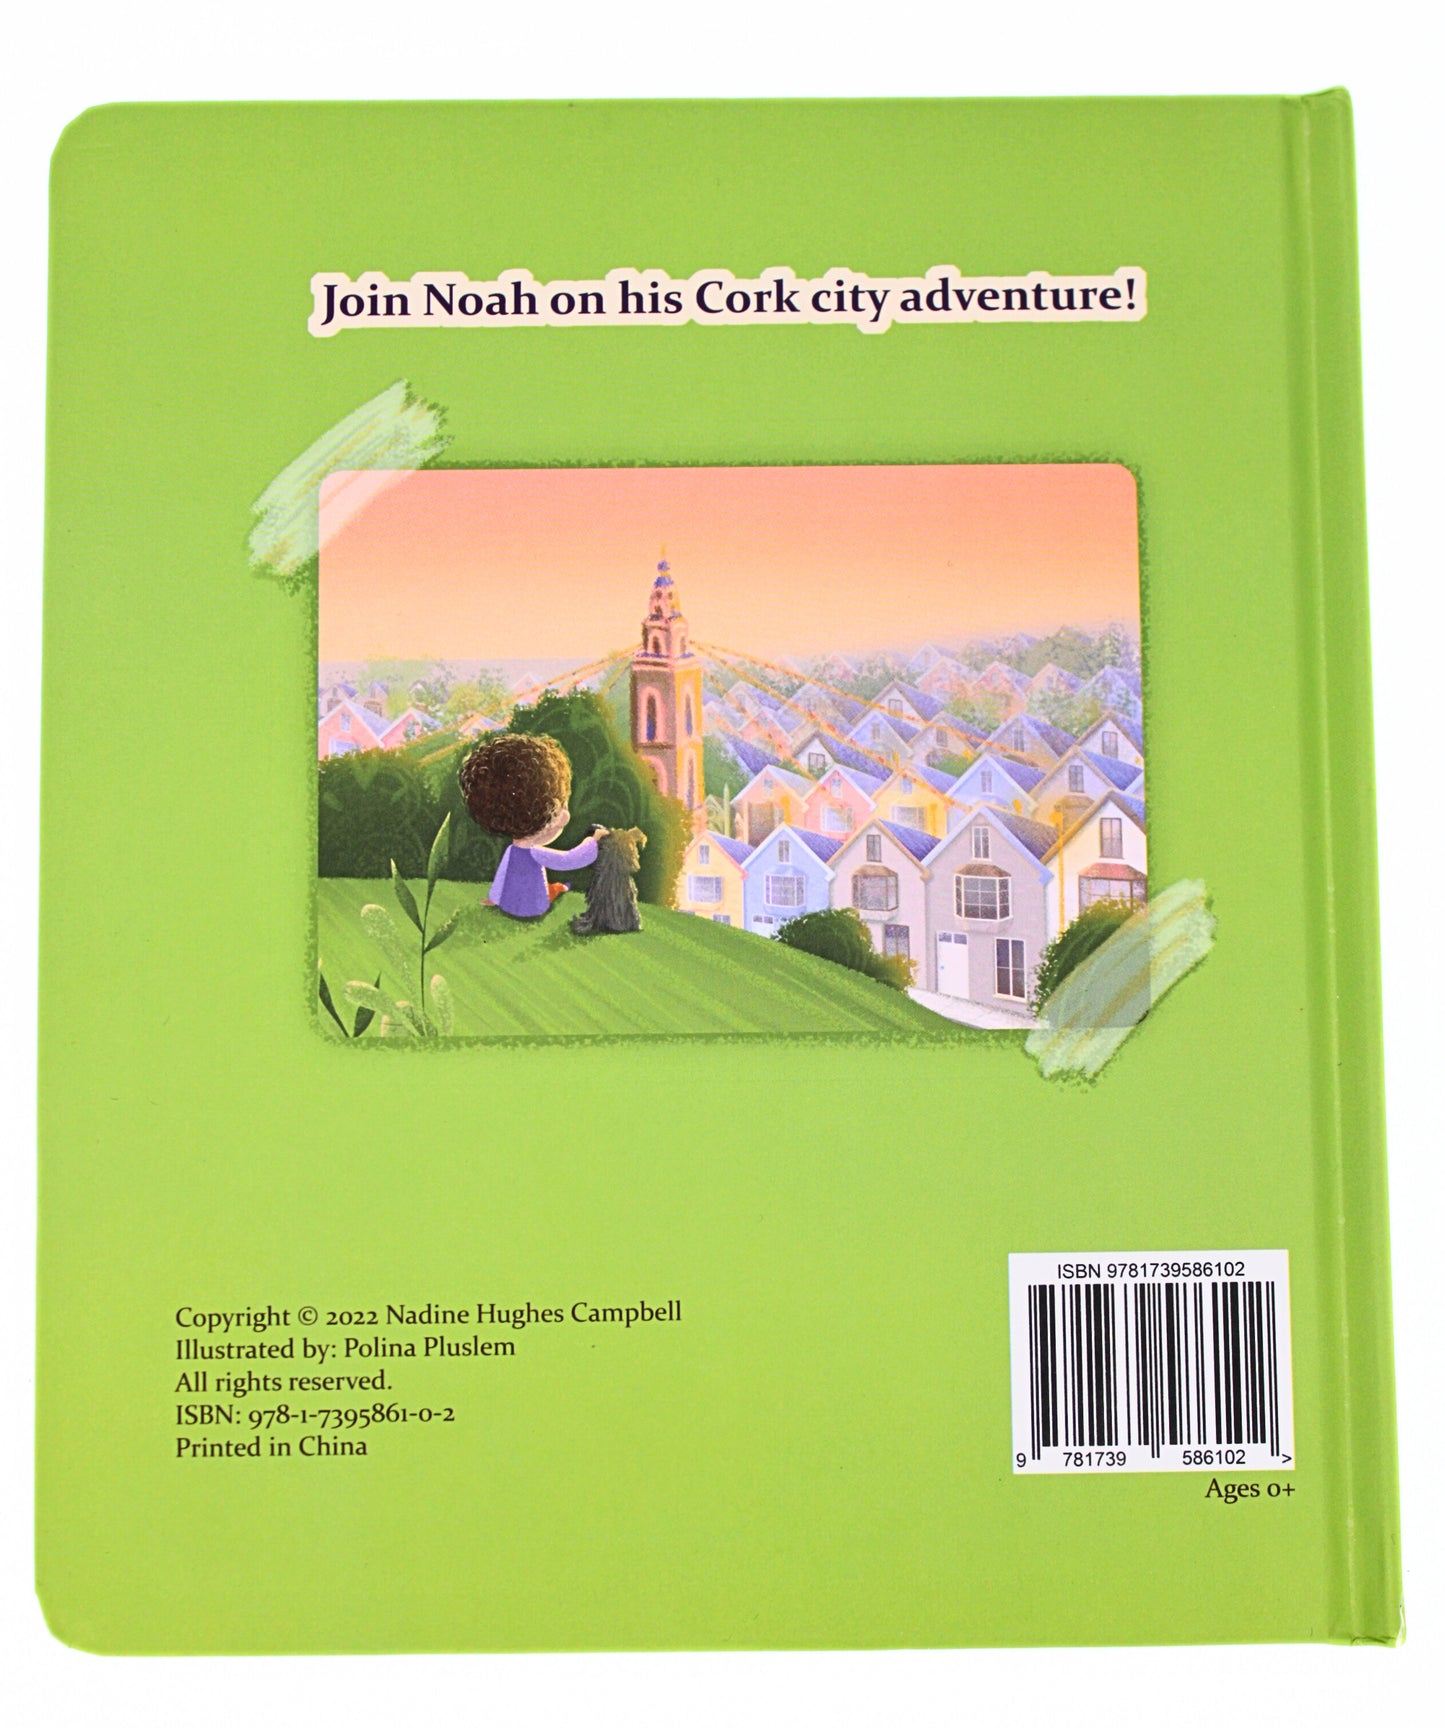 Back Cover of Noah's Cork Adventure Picture Book